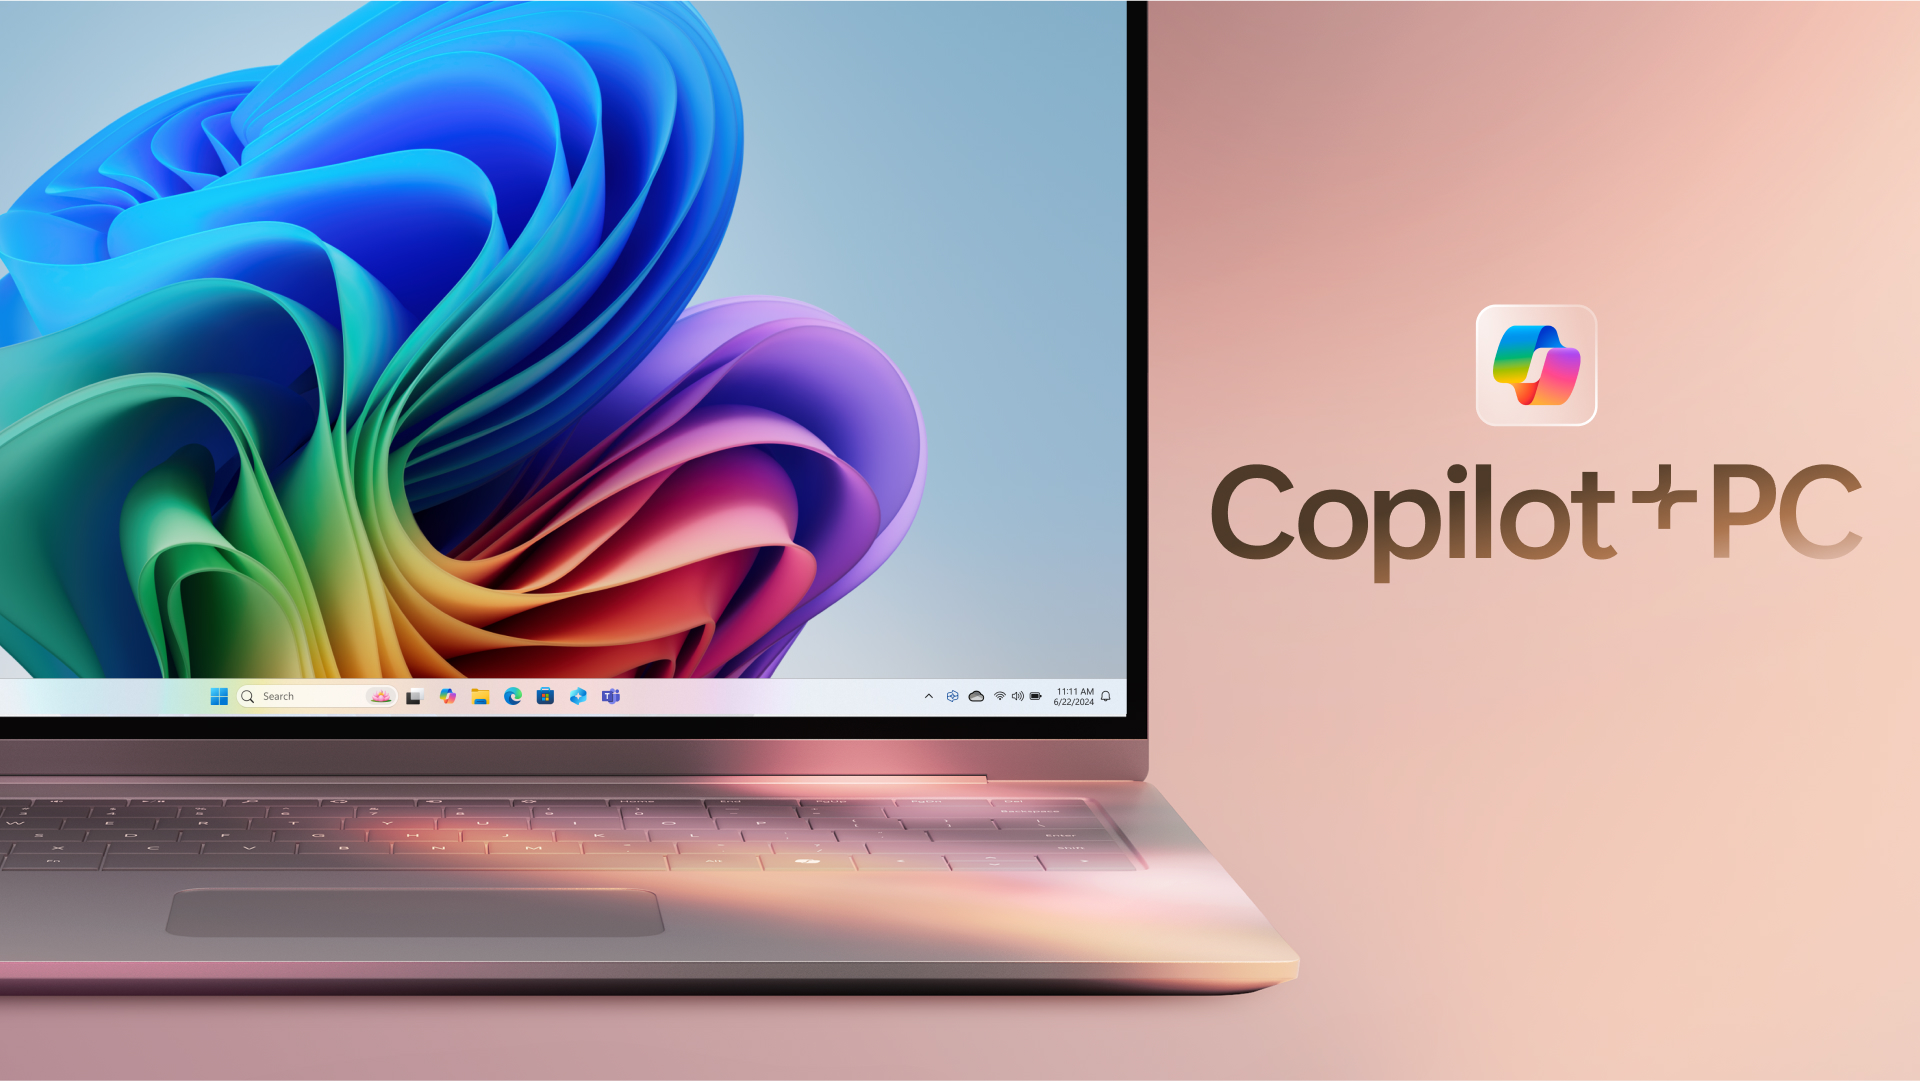 A laptop with a vibrant, multicolored abstract wallpaper displayed on the screen, alongside a Copilot+ PC logo on the right side of a secondary monitor with a light pink background.